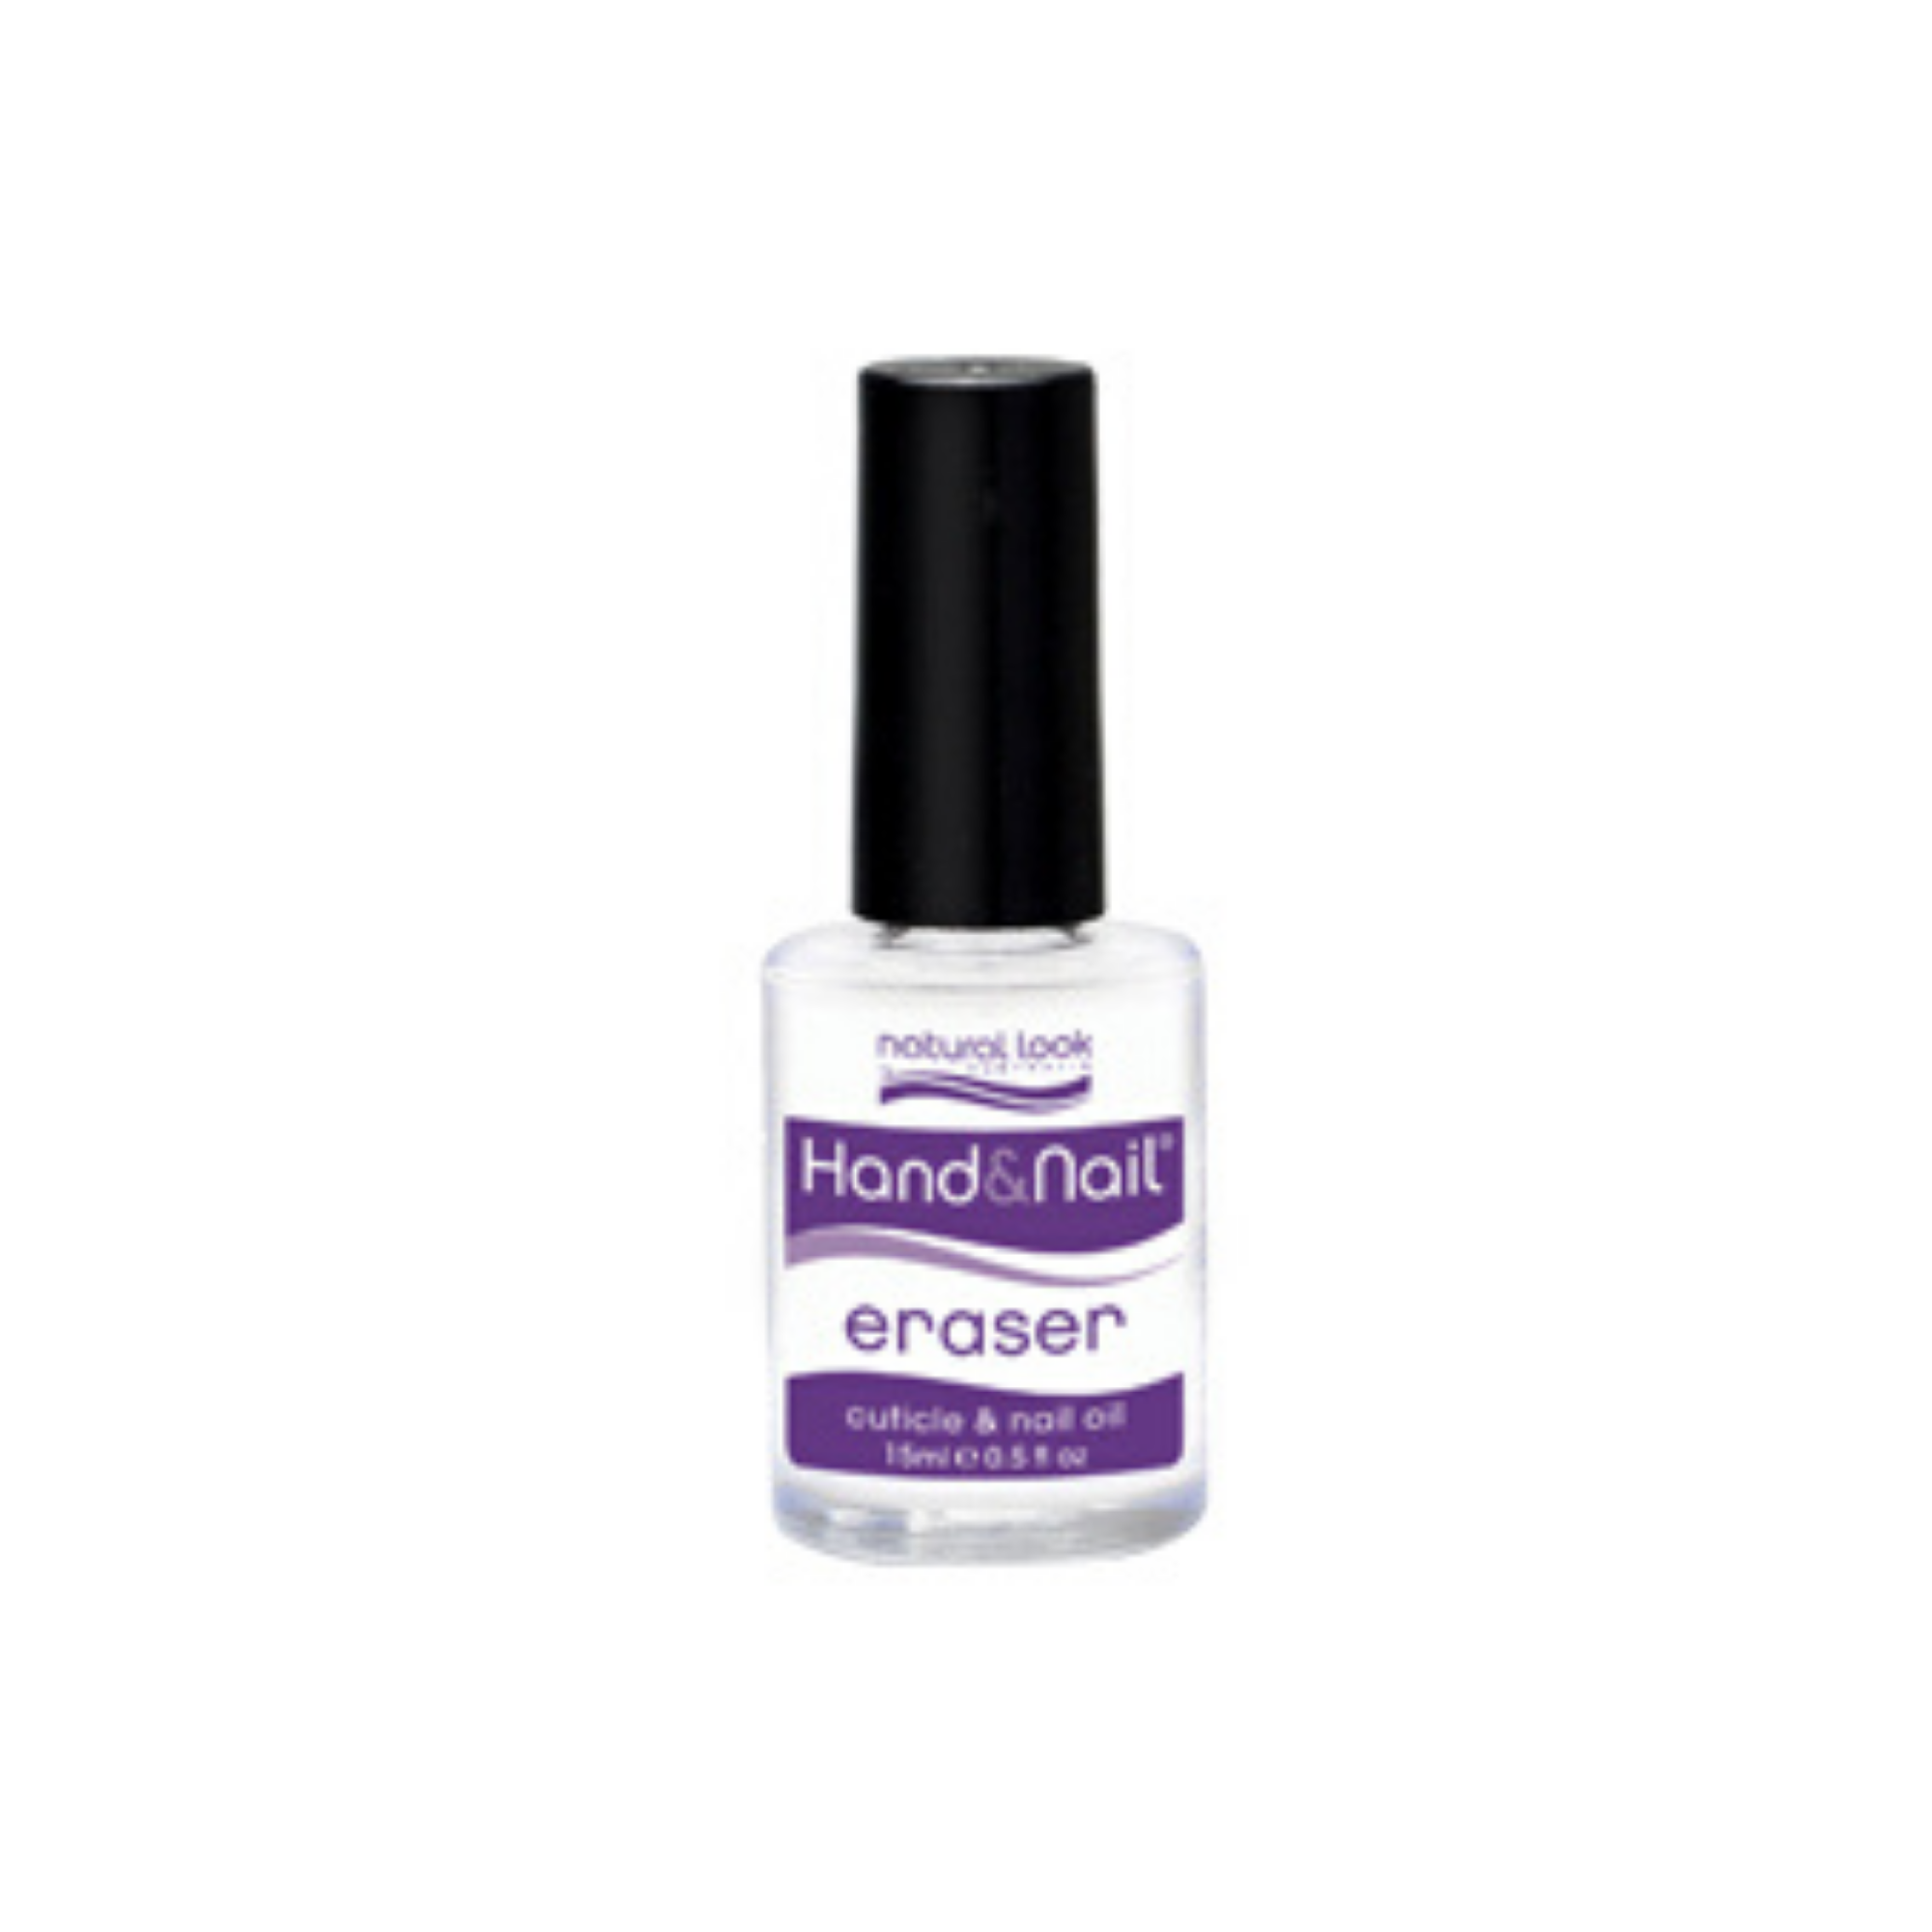 Natural Look Eraser Cuticle & Stain Remover